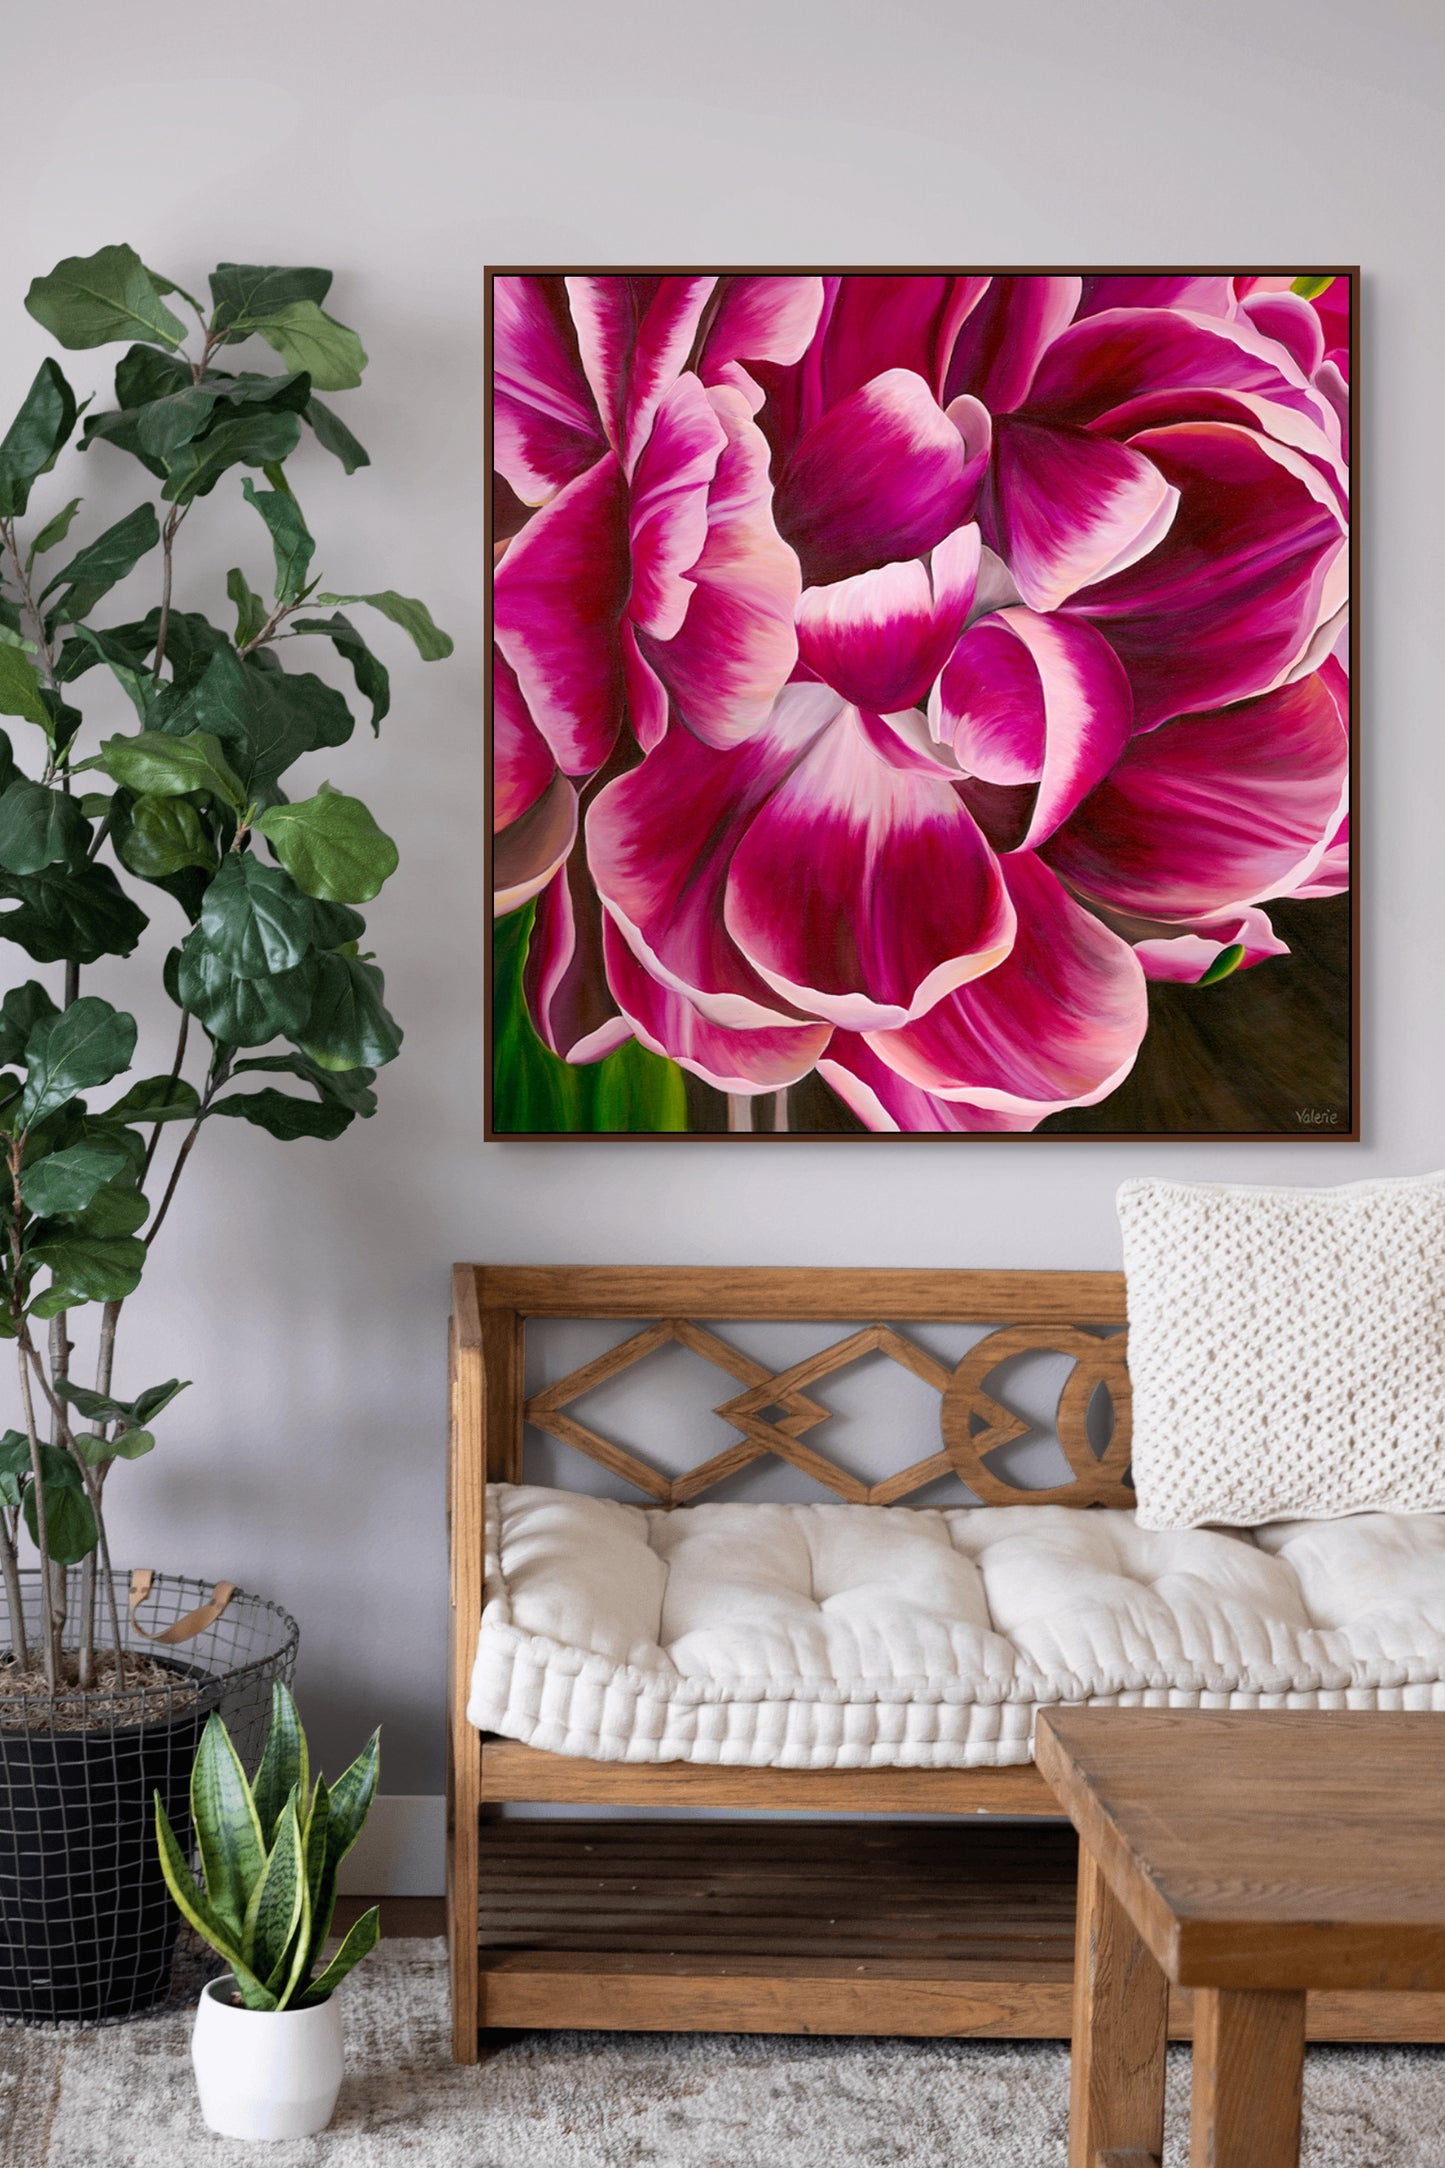 The Tulips Are Too Excitable – Limited Edition Print